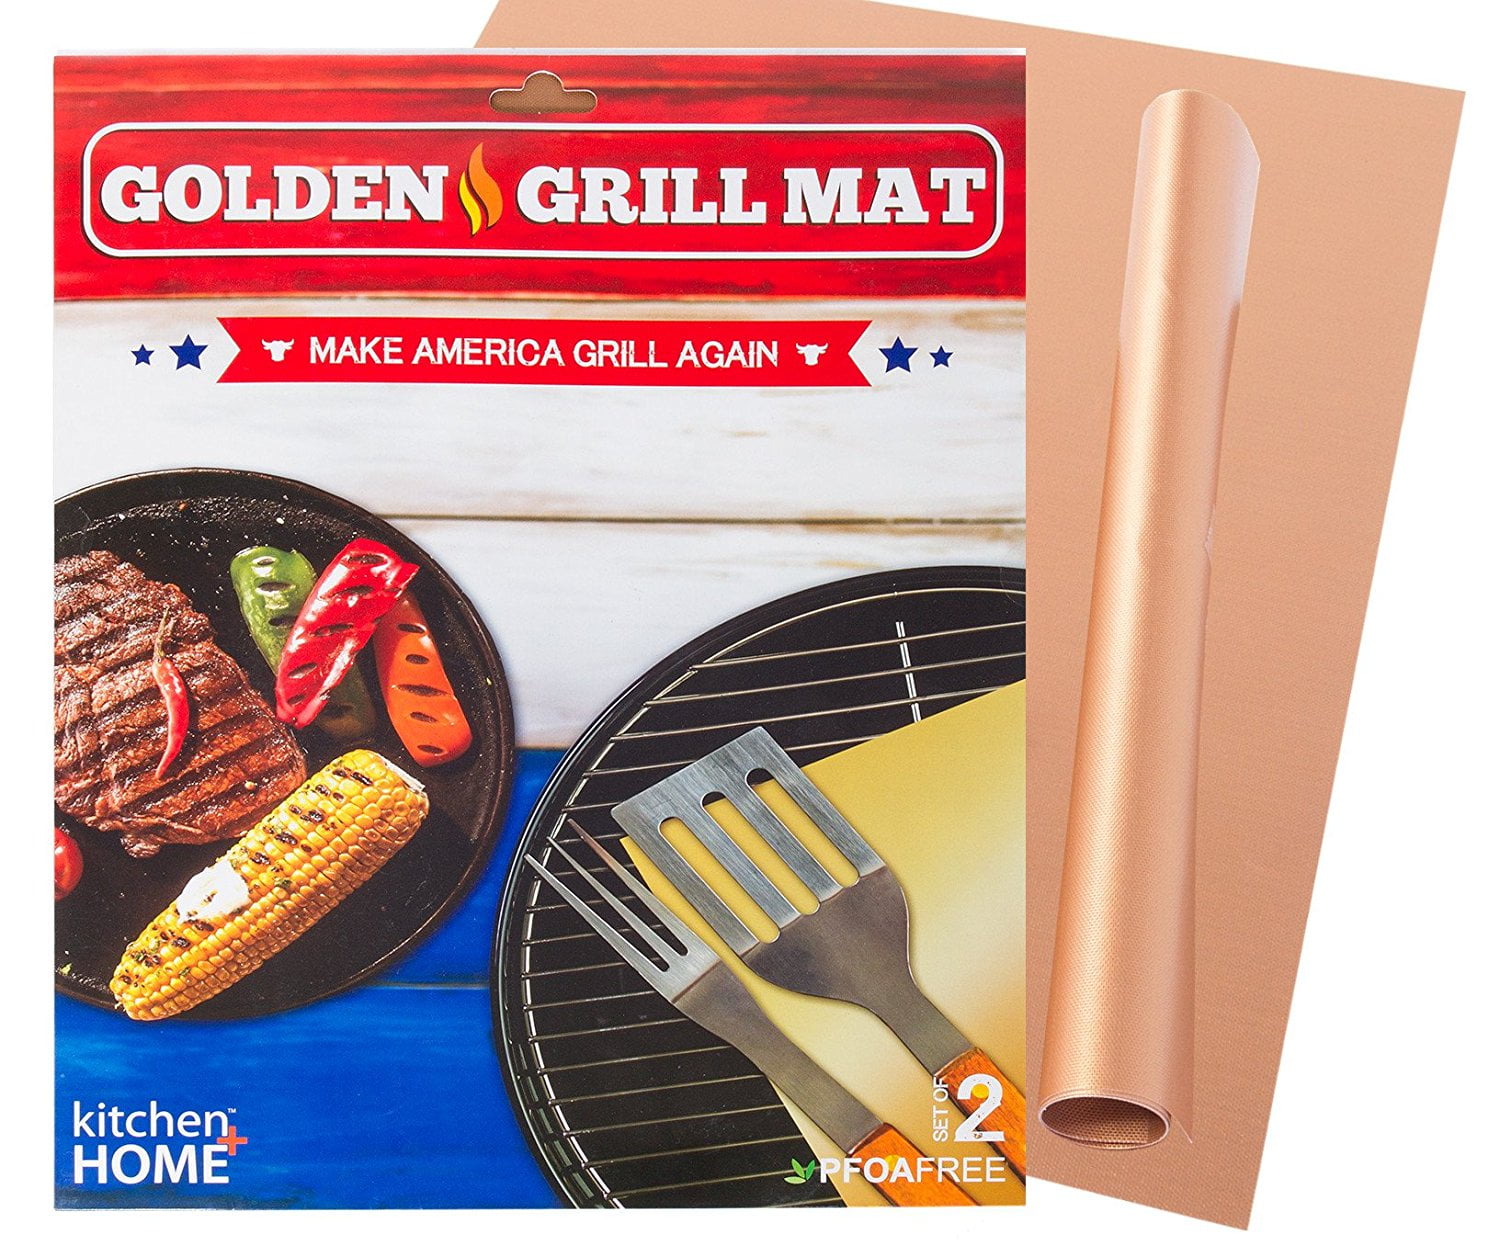 100% Non-Stick BBQ Grill & Baking Mats FDA-Approved Gold Grill Mat Reusable and Easy to Clean 